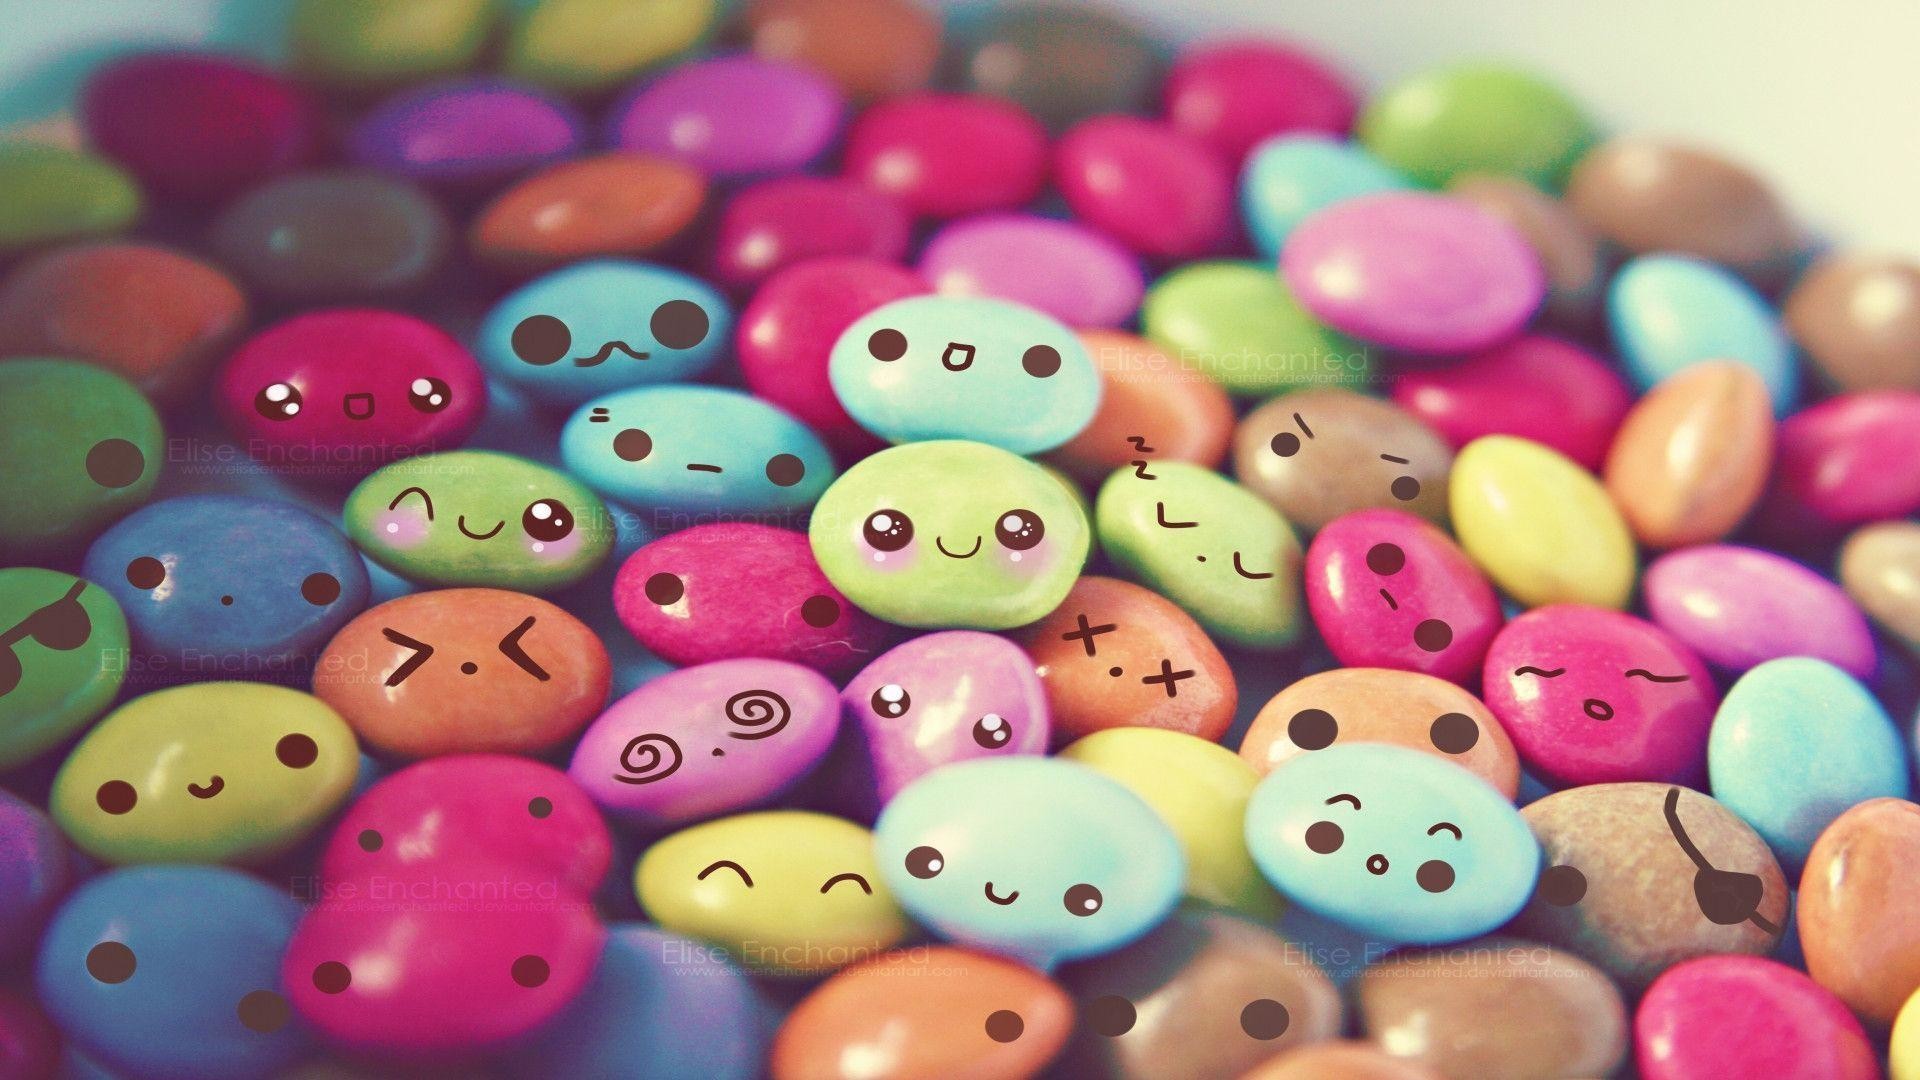 1920x1080 Wallpapers For > Cute Colorful Desktop Backgrounds